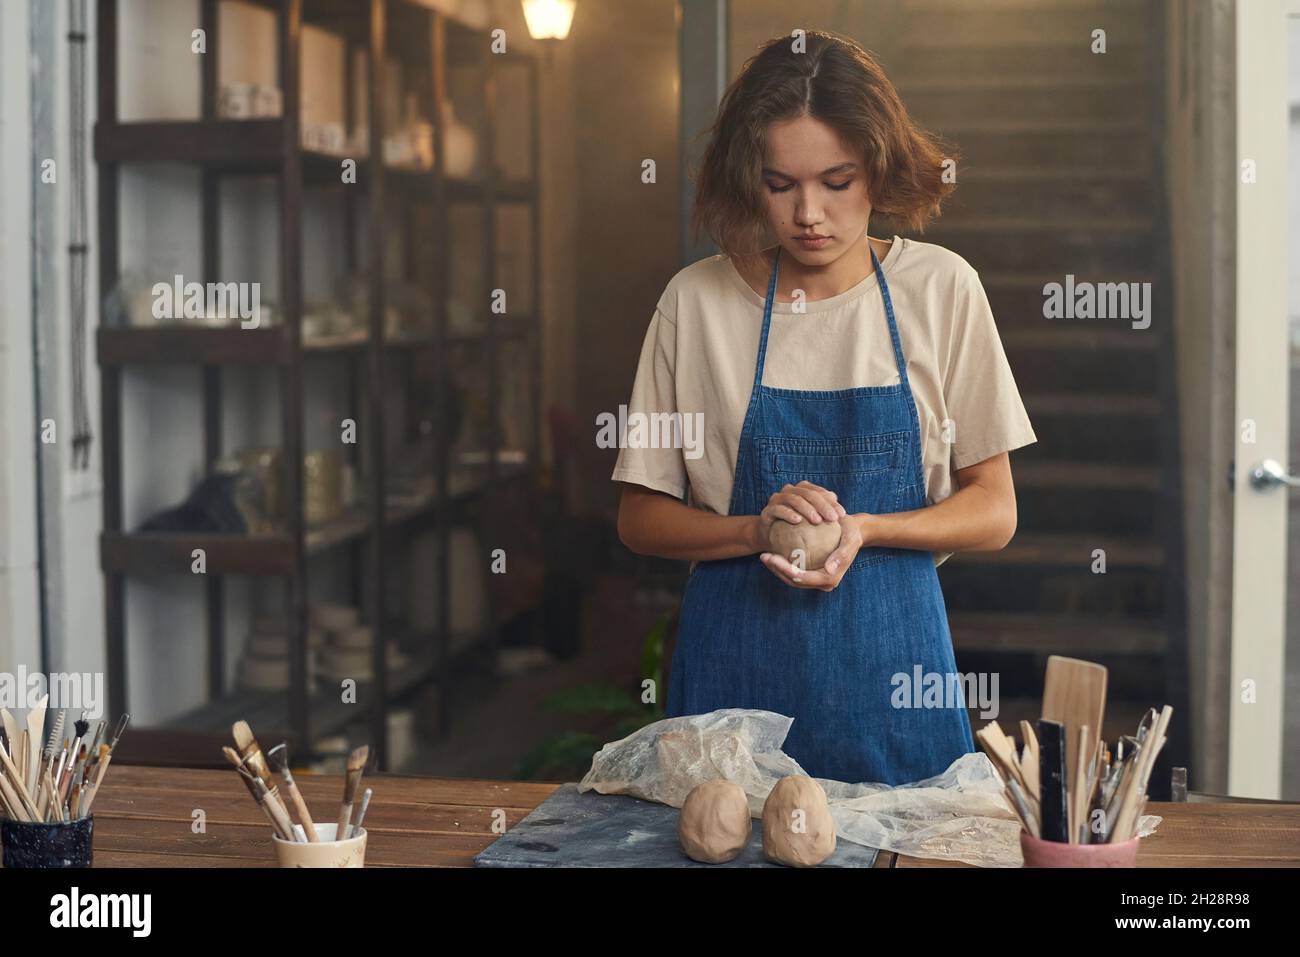 Concentrated young female potter in apron balling up clay while preparing it for sculpting in workshop Stock Photo